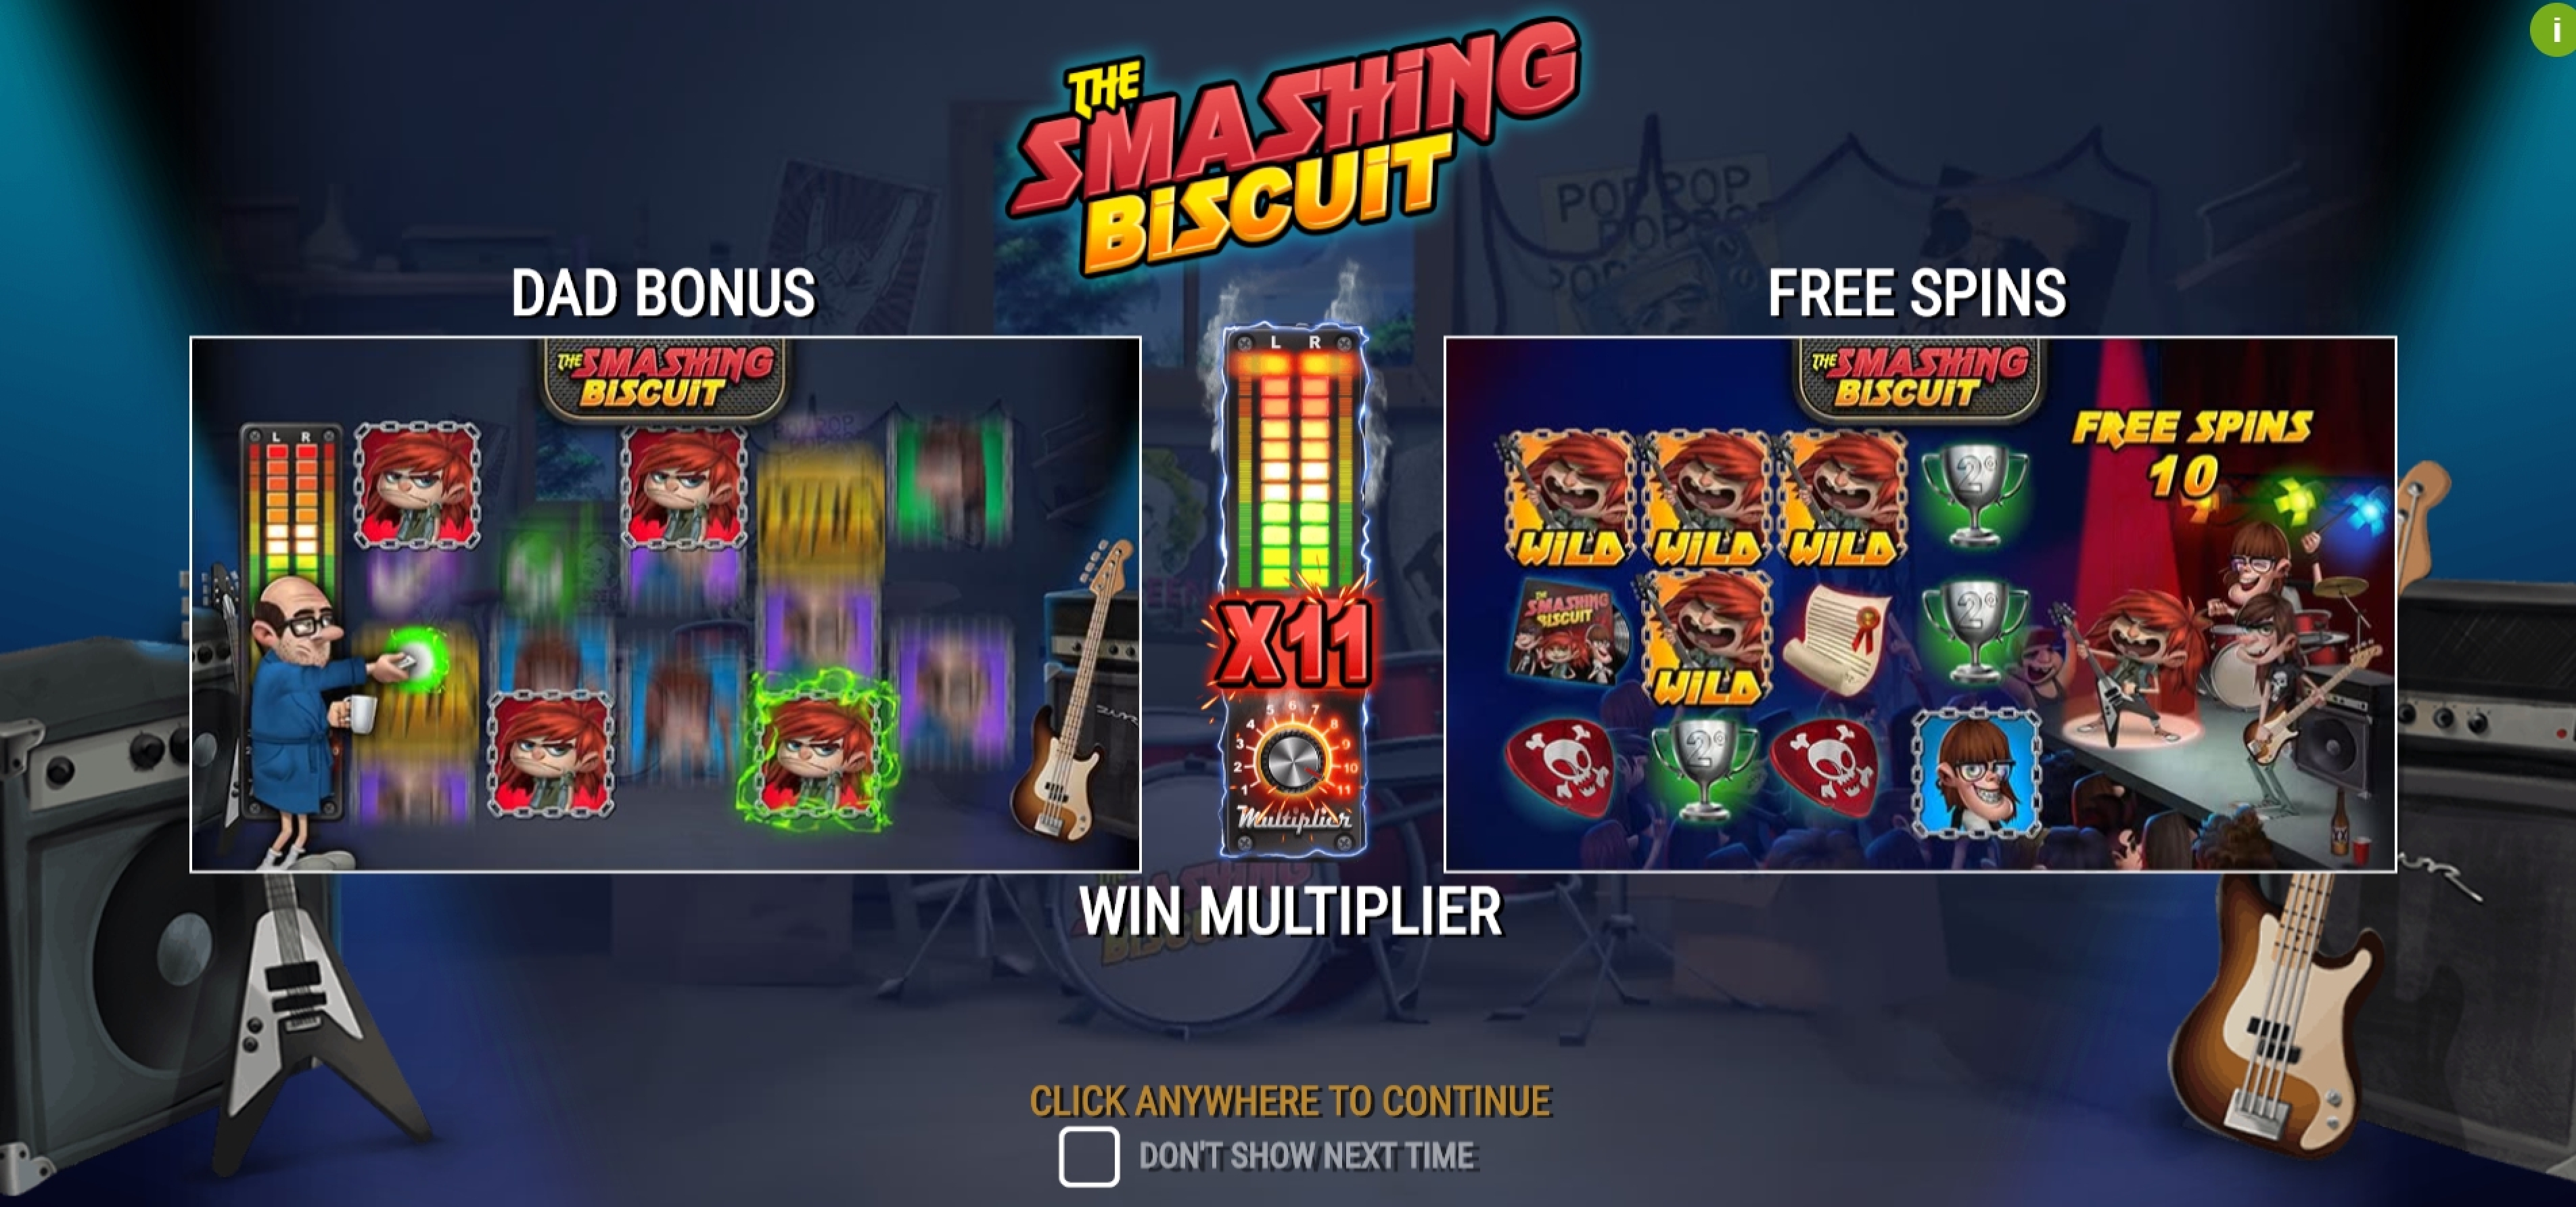 Play The Smashing Biscuit Free Casino Slot Game by PearFiction Studios